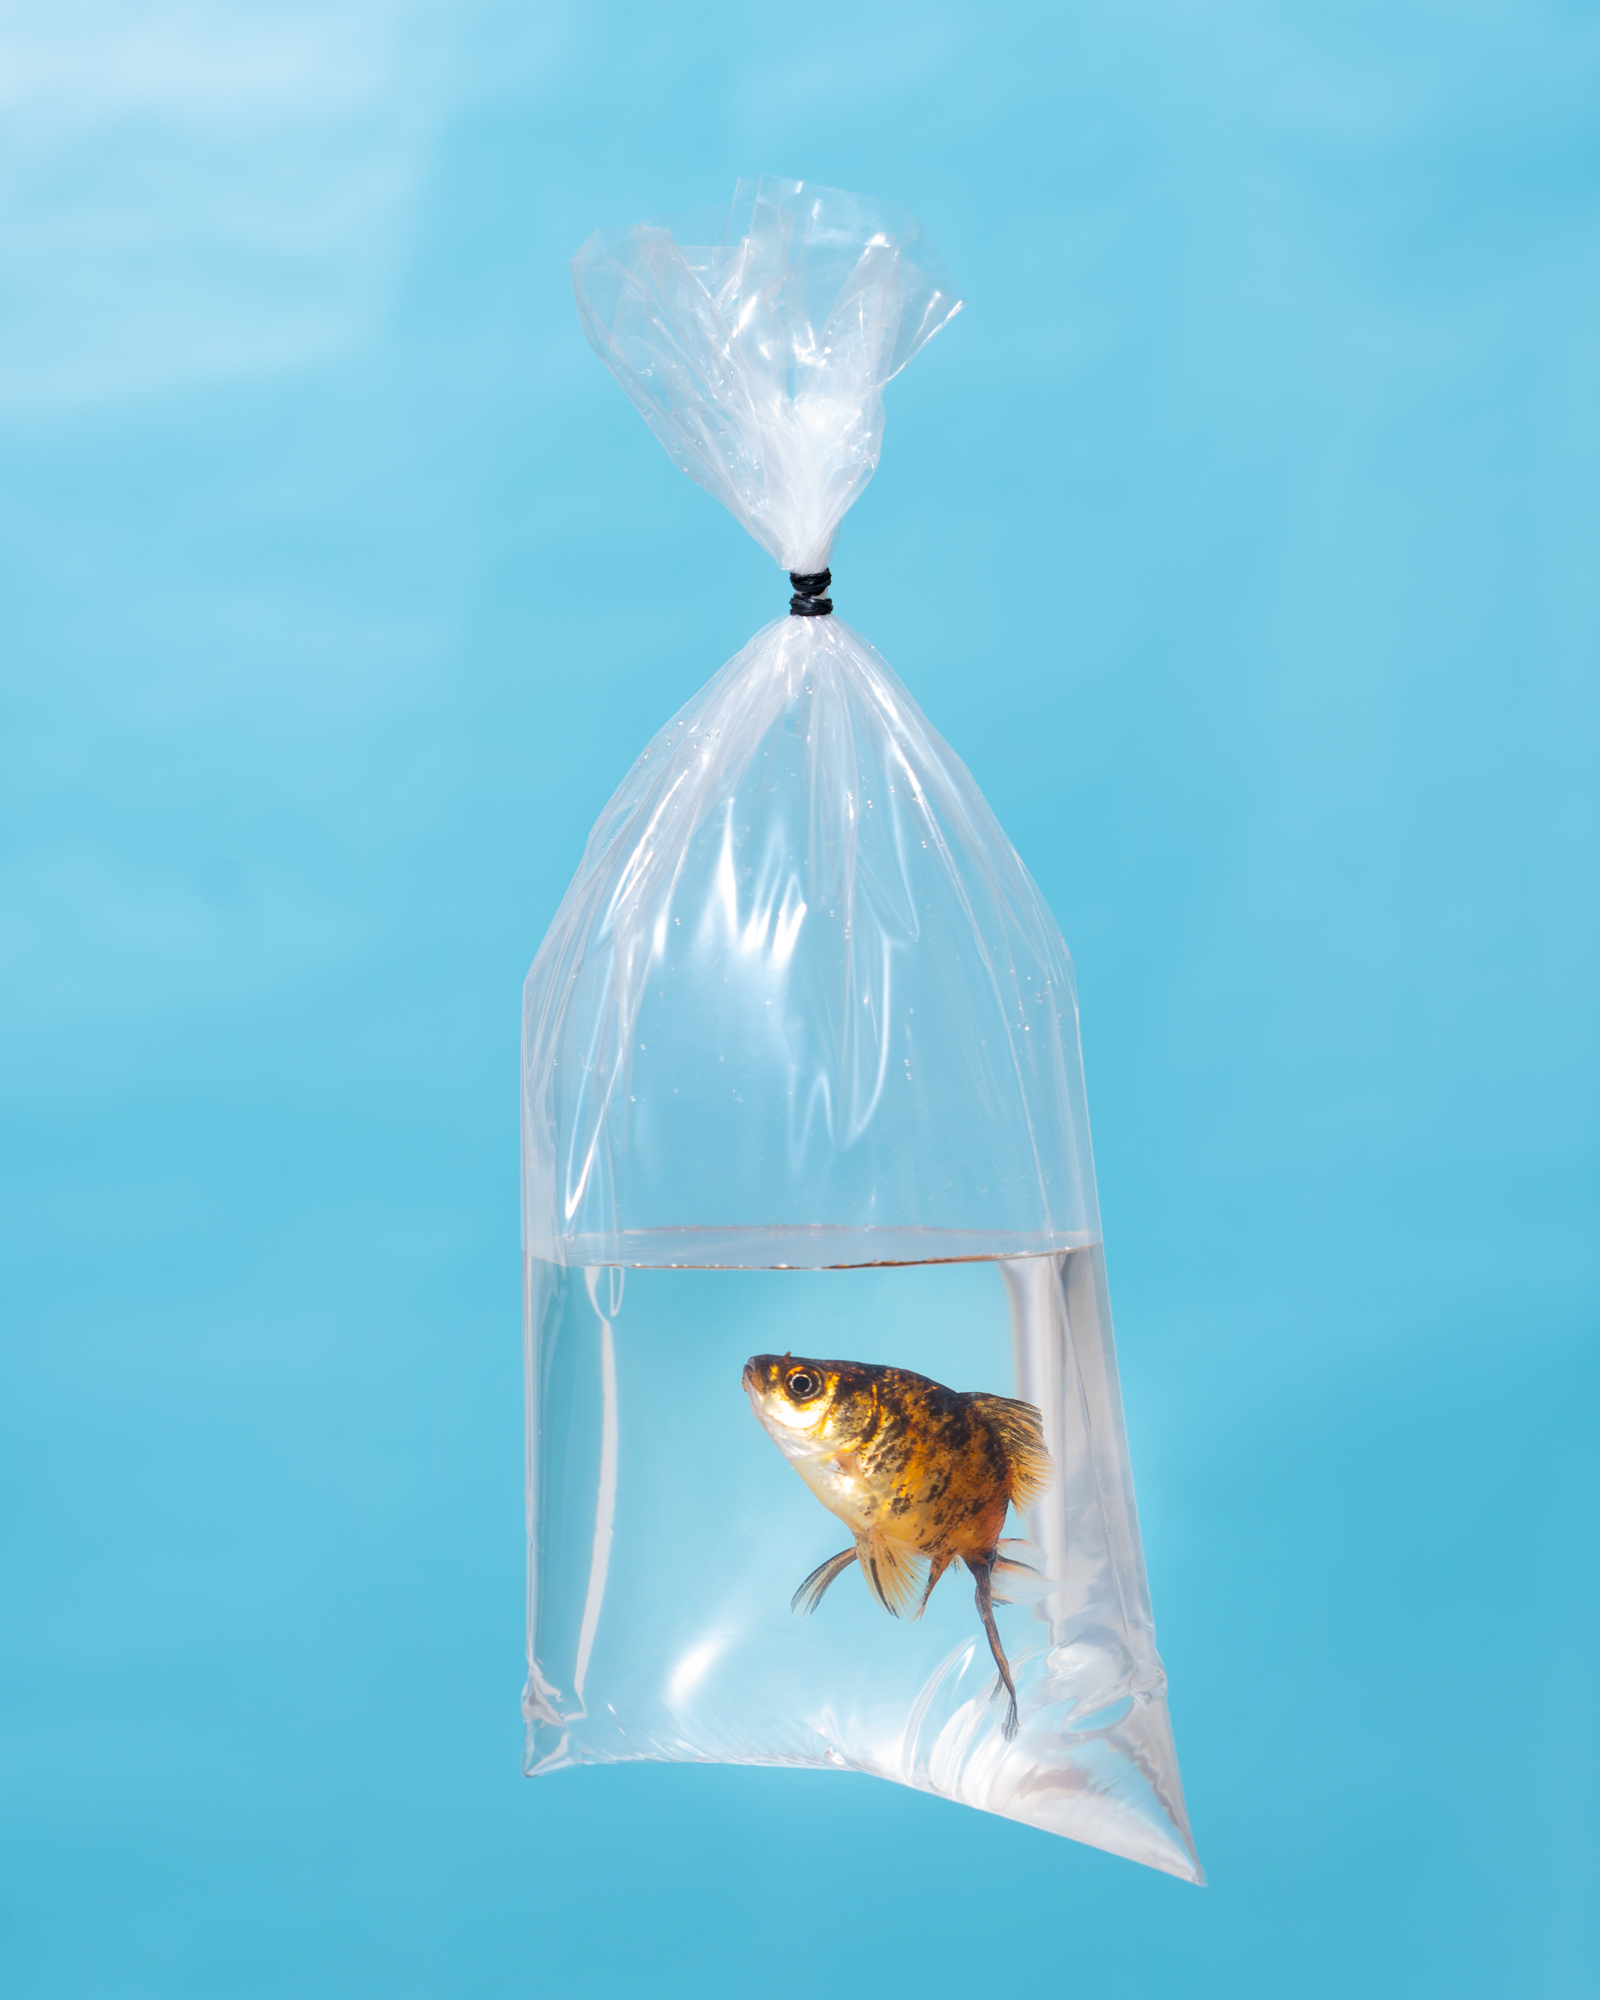 Goldfish In Plastic Bag. Goldfish in a plastic bag on a white